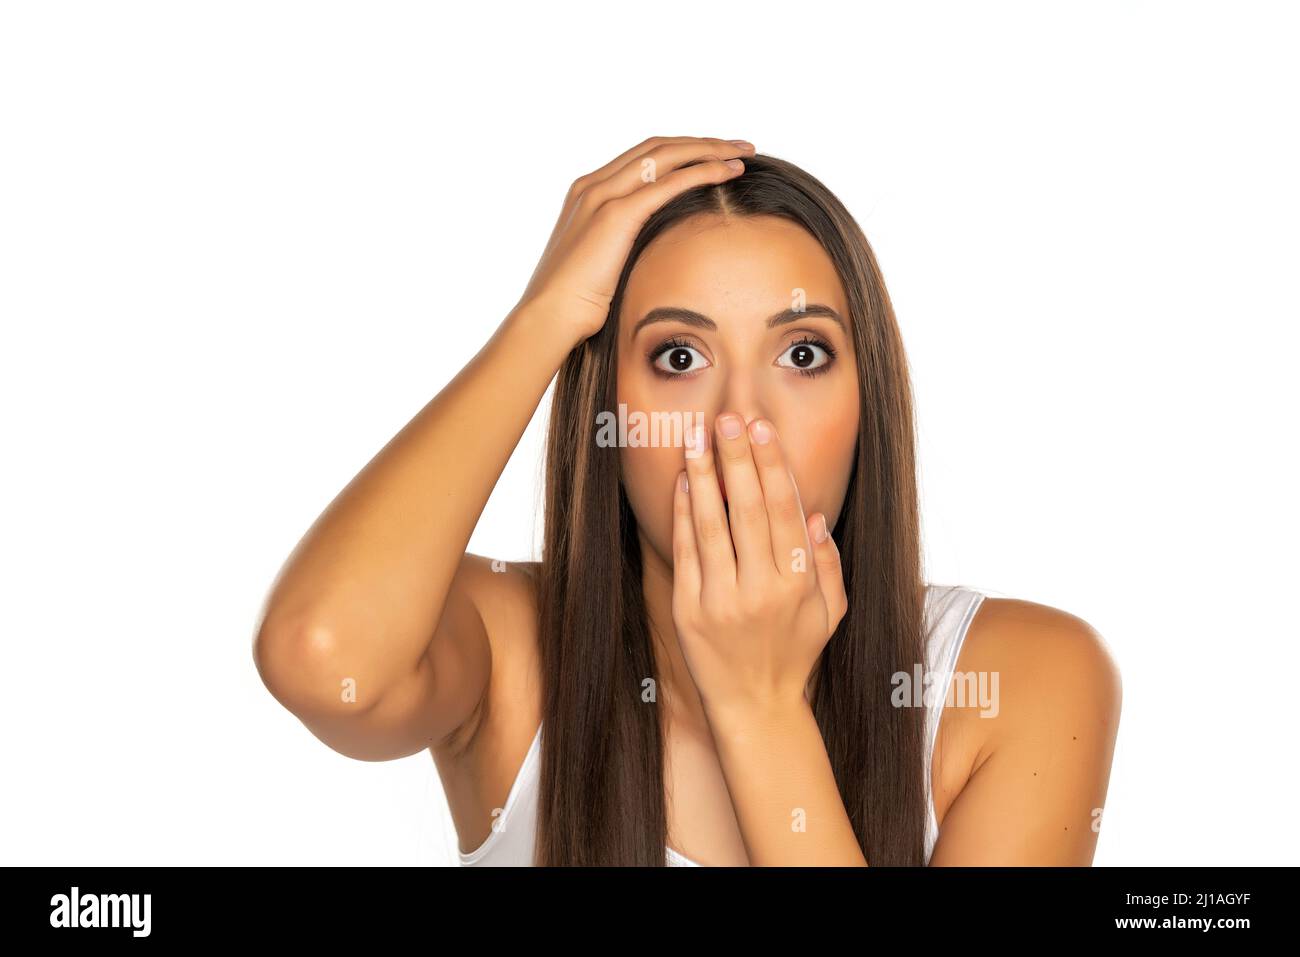 Shocked young woman covers her mouth with her hand on a white background Stock Photo